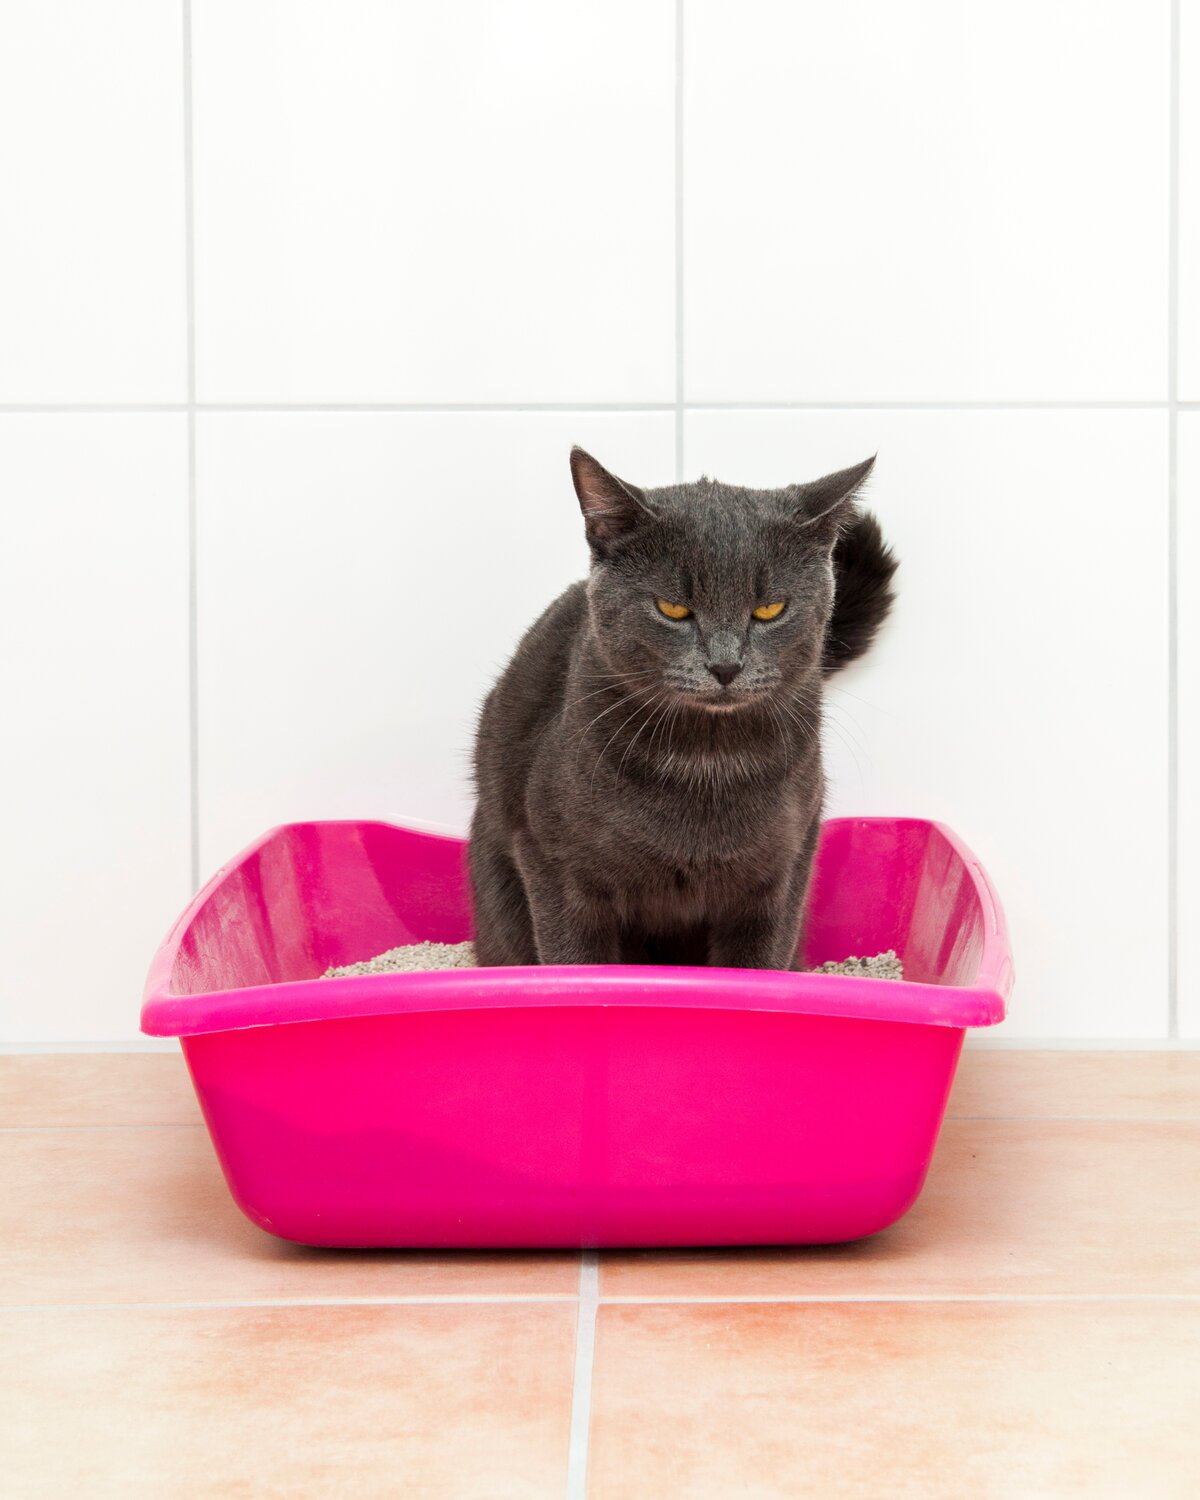 A grumpy gray cat standing in an old, pink litter box